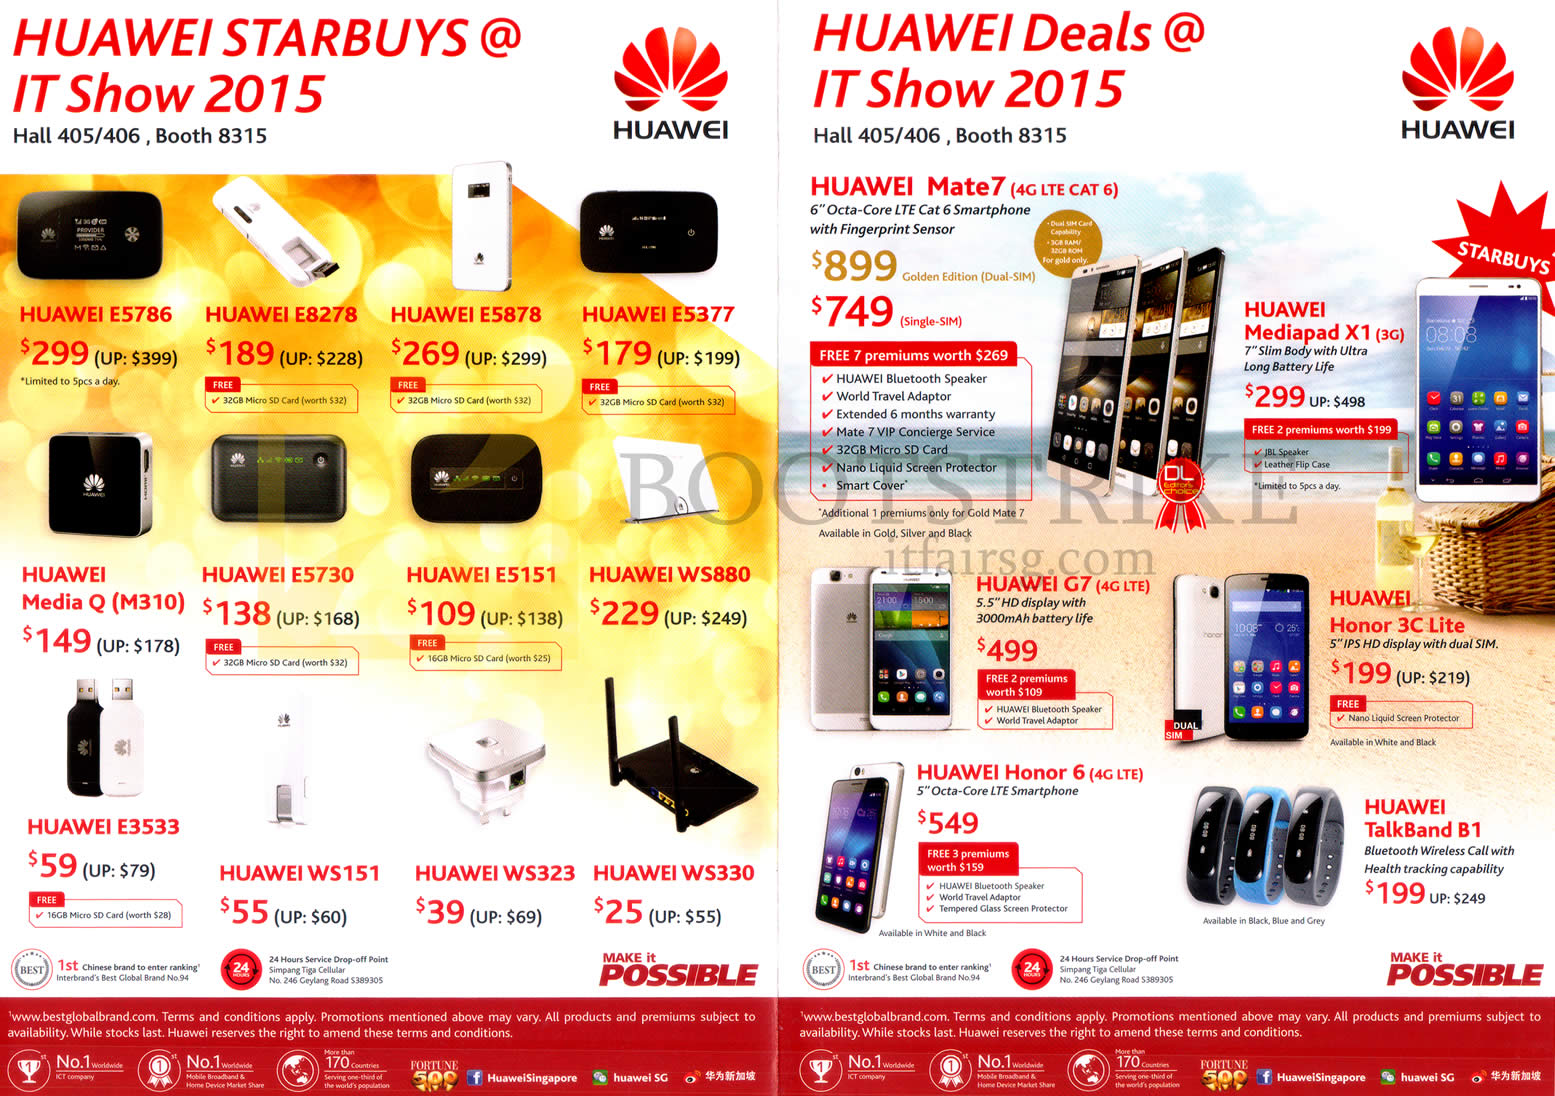 IT SHOW 2015 price list image brochure of Convergent Huawei Routers, Mobile Phones, Mate7, Mediapad X1, G7, Honor 3C Lite, Honor 6, TalkBand B1